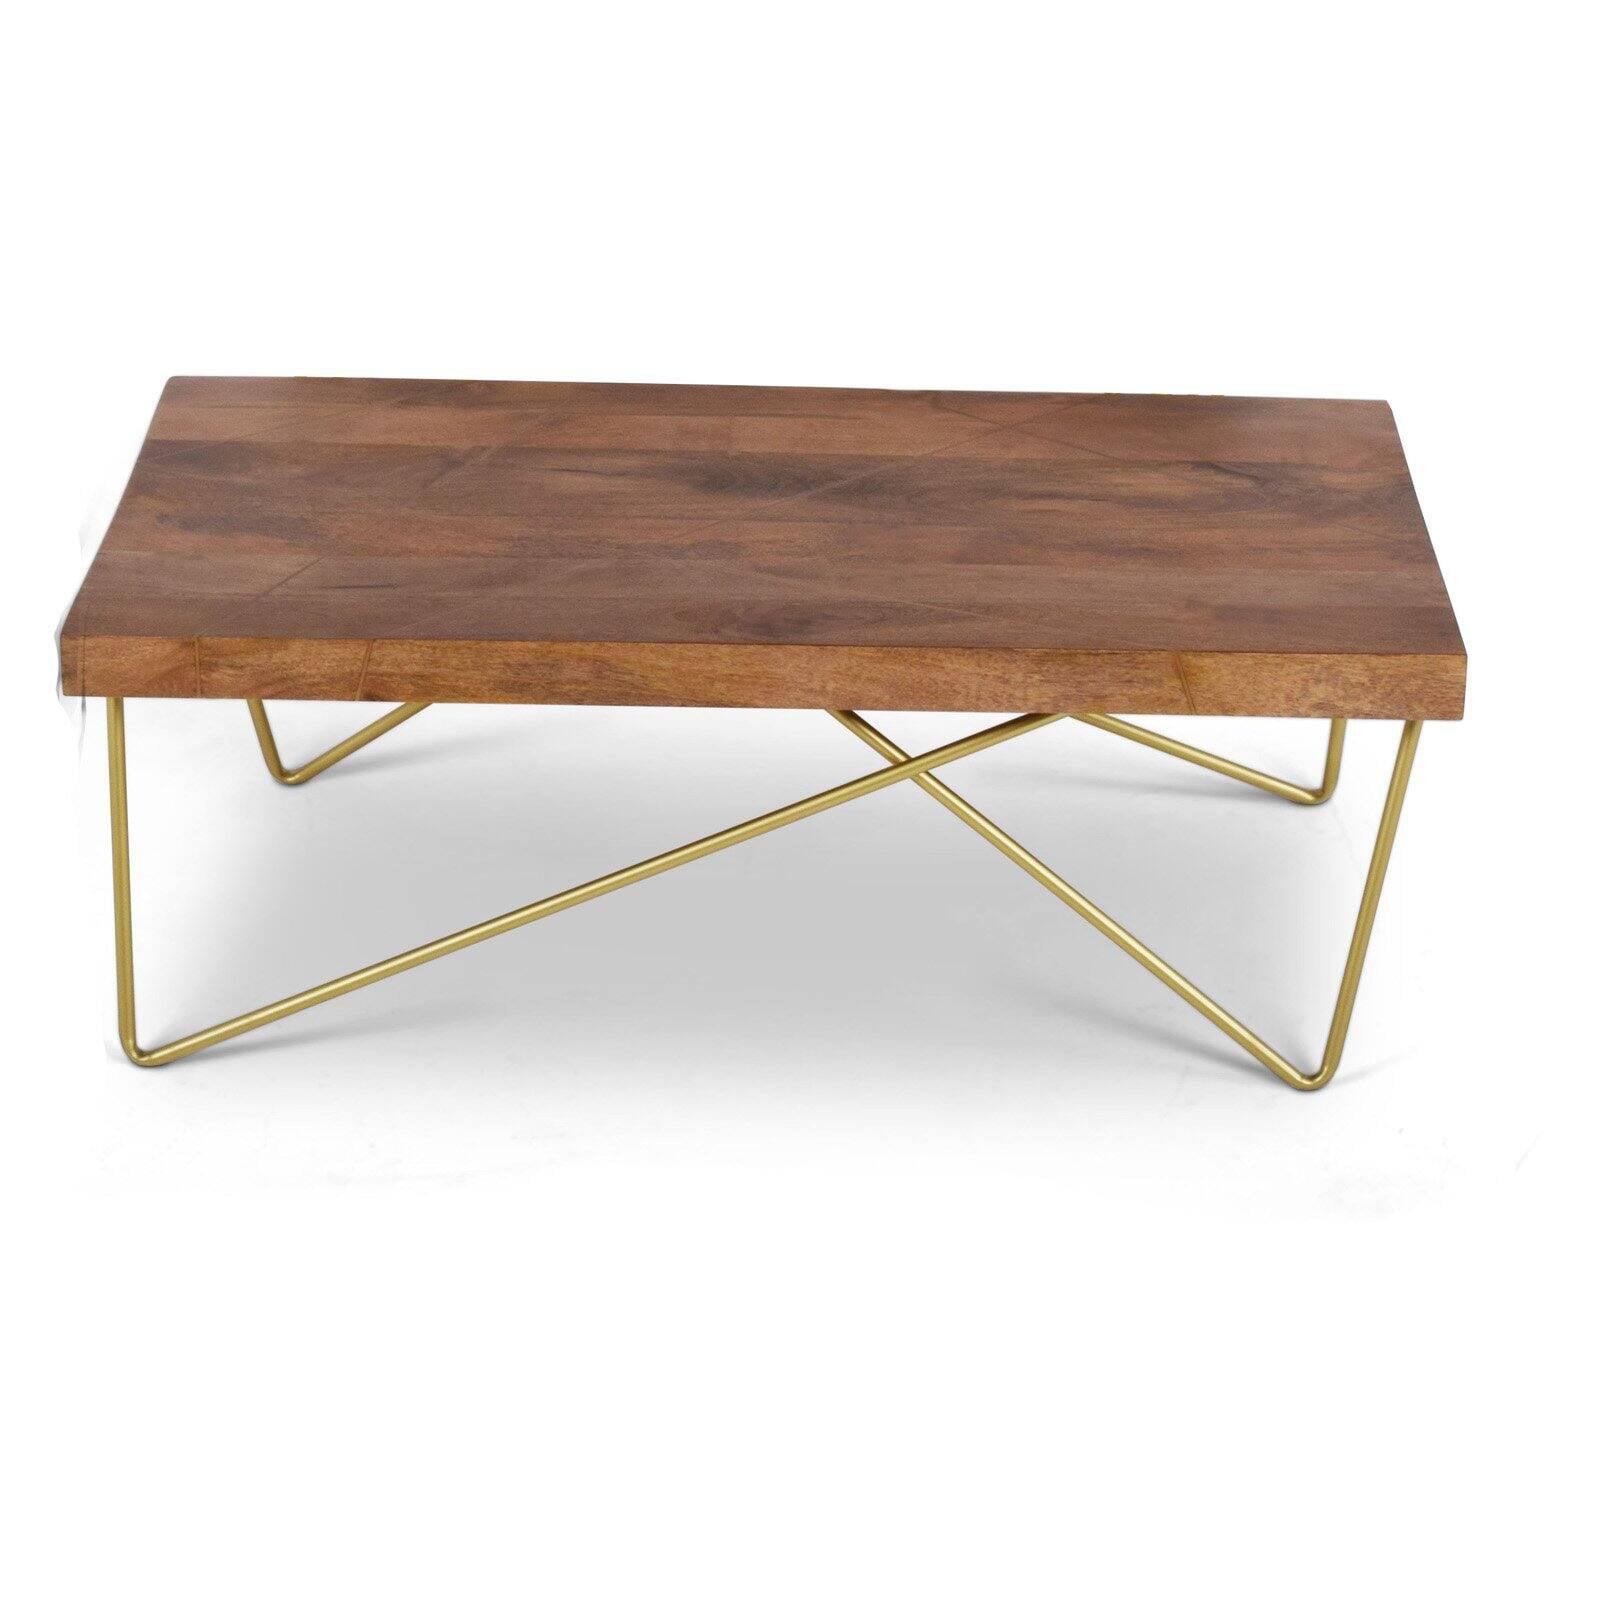 Walter Warm Pine and Brass Industrial Sofa Table